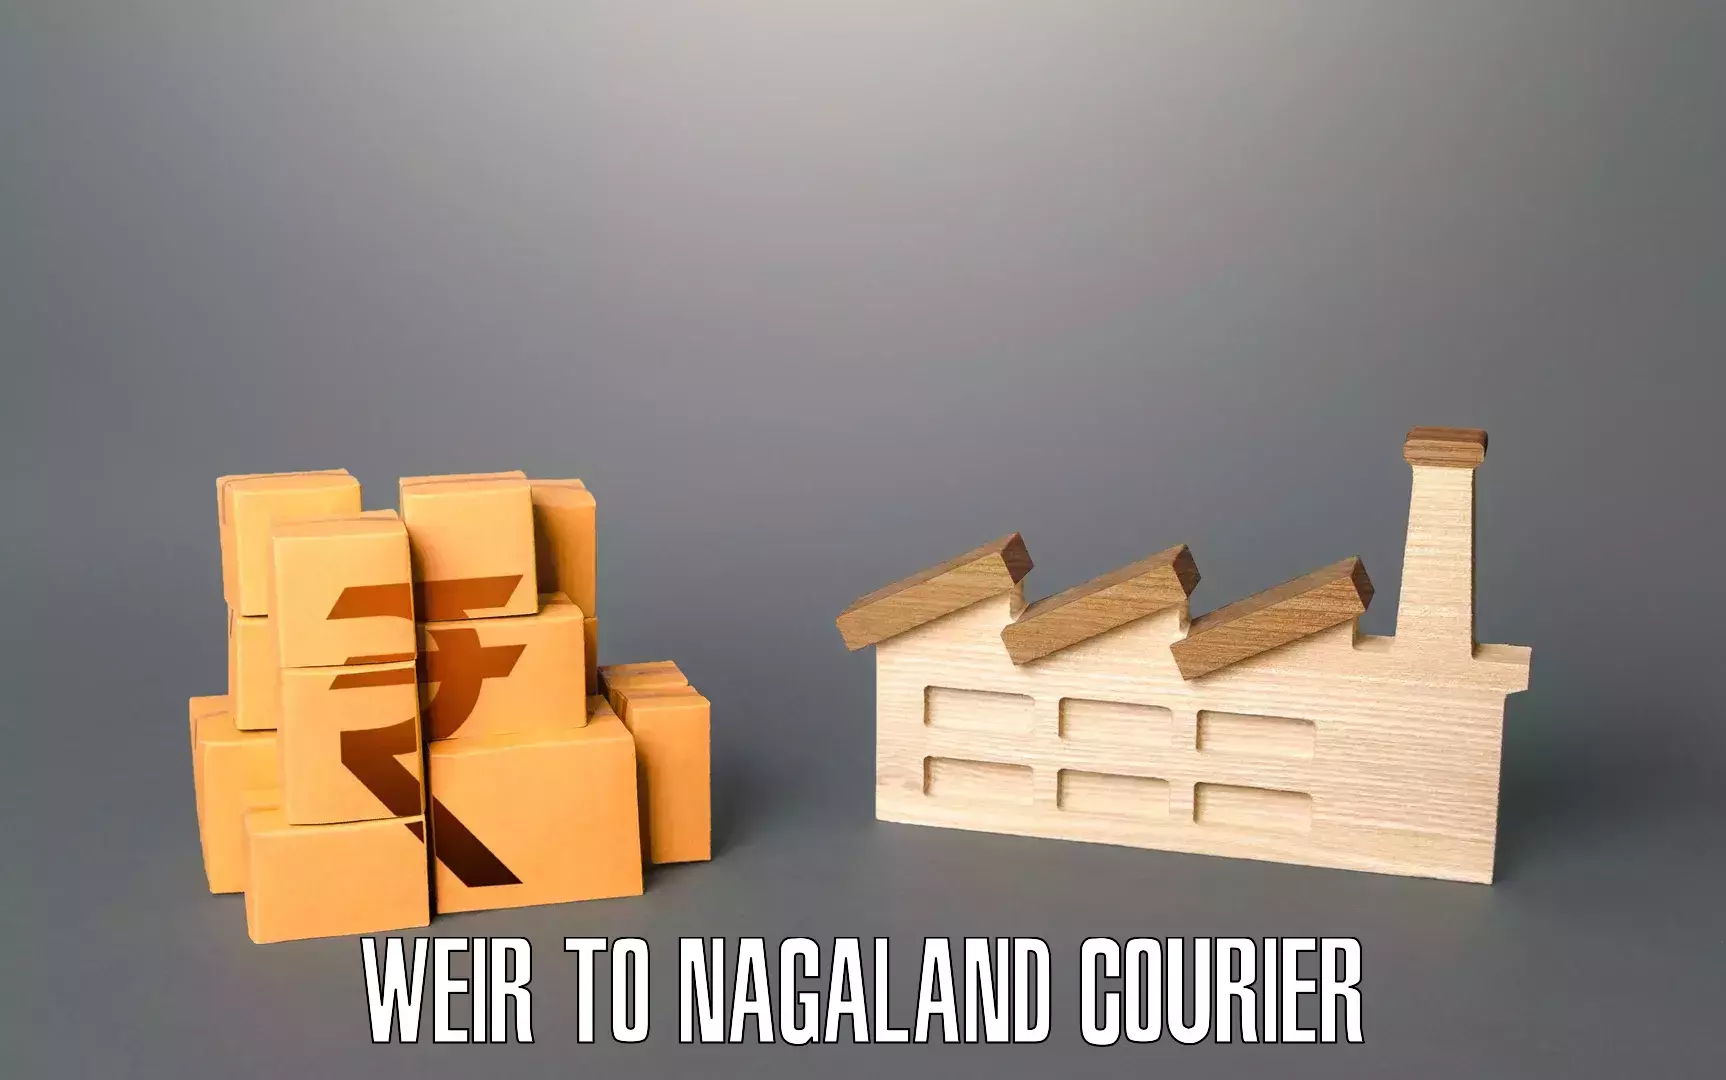 Furniture delivery service Weir to Nagaland